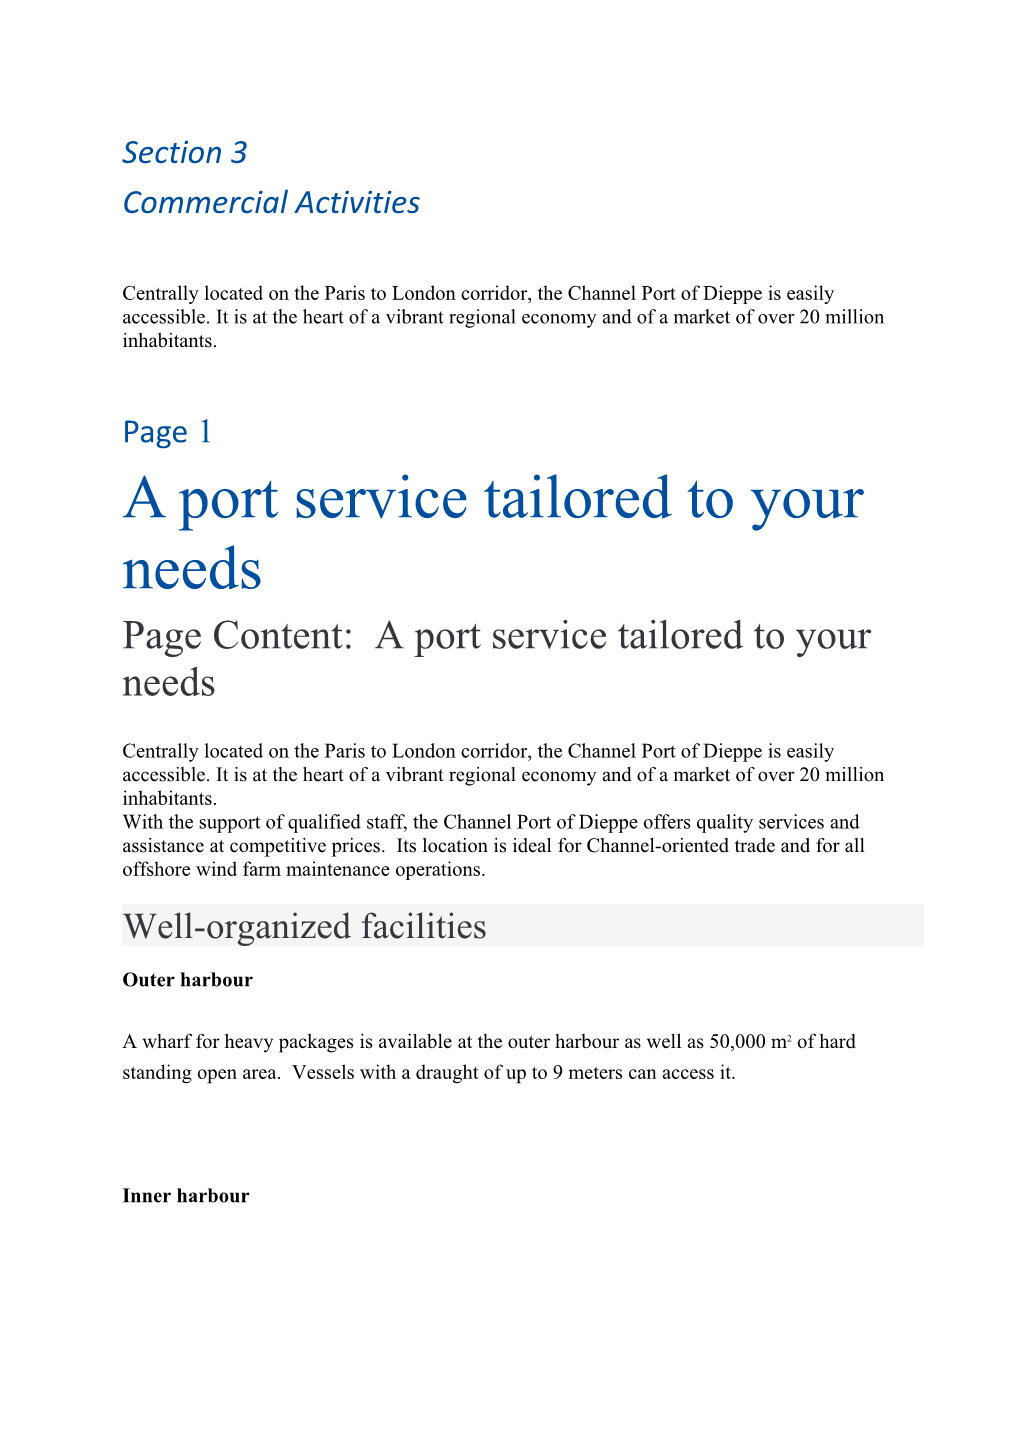 Page Content: a Port Service Tailored to Your Needs